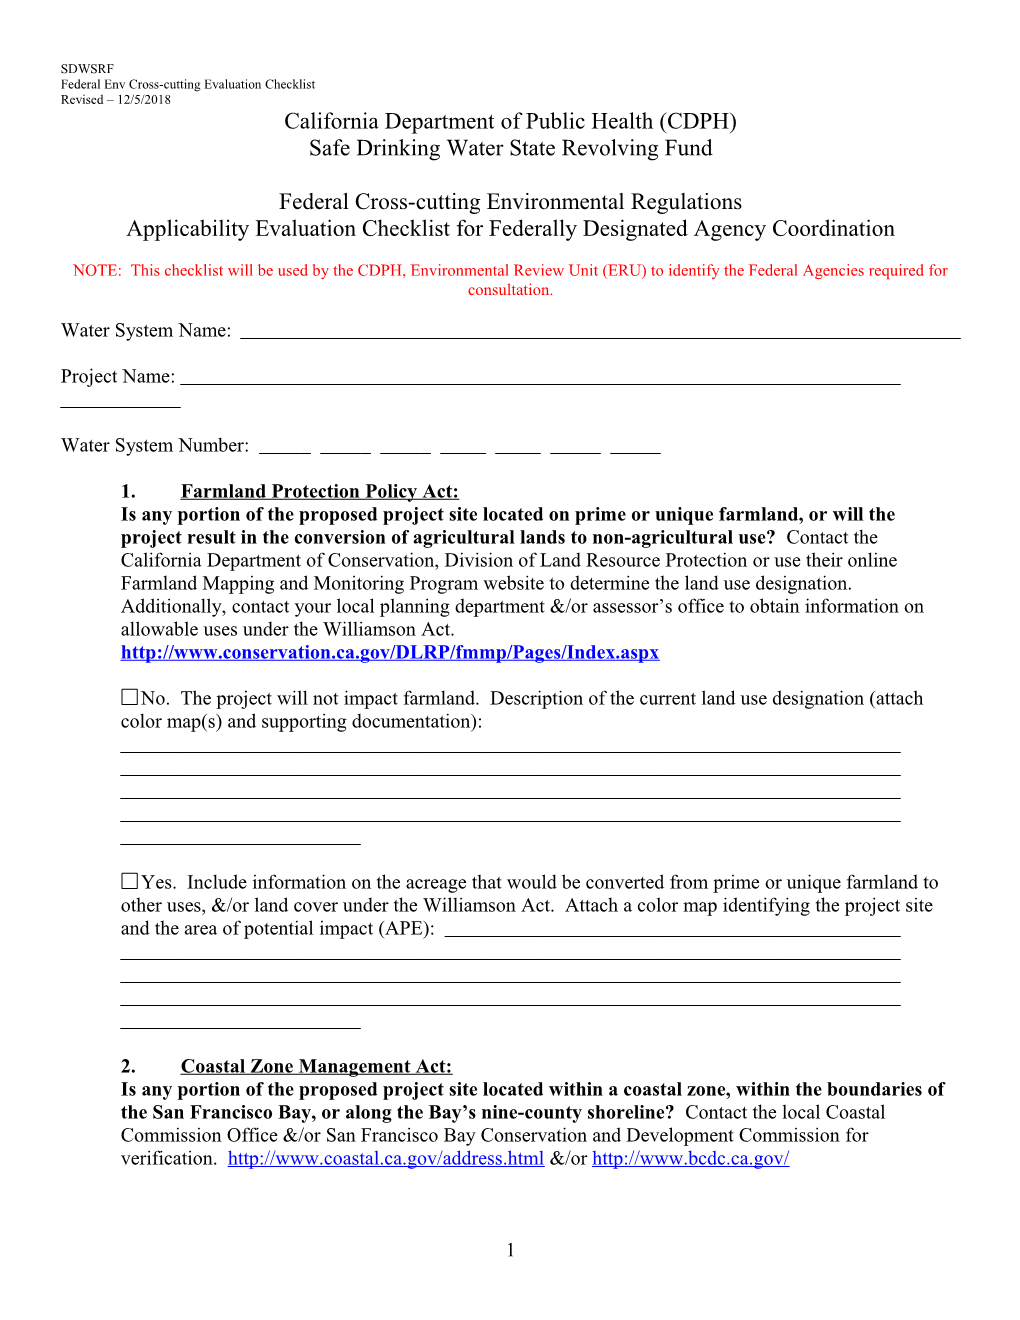 Applicability Evaluation for Federally Designated Agency Coordination